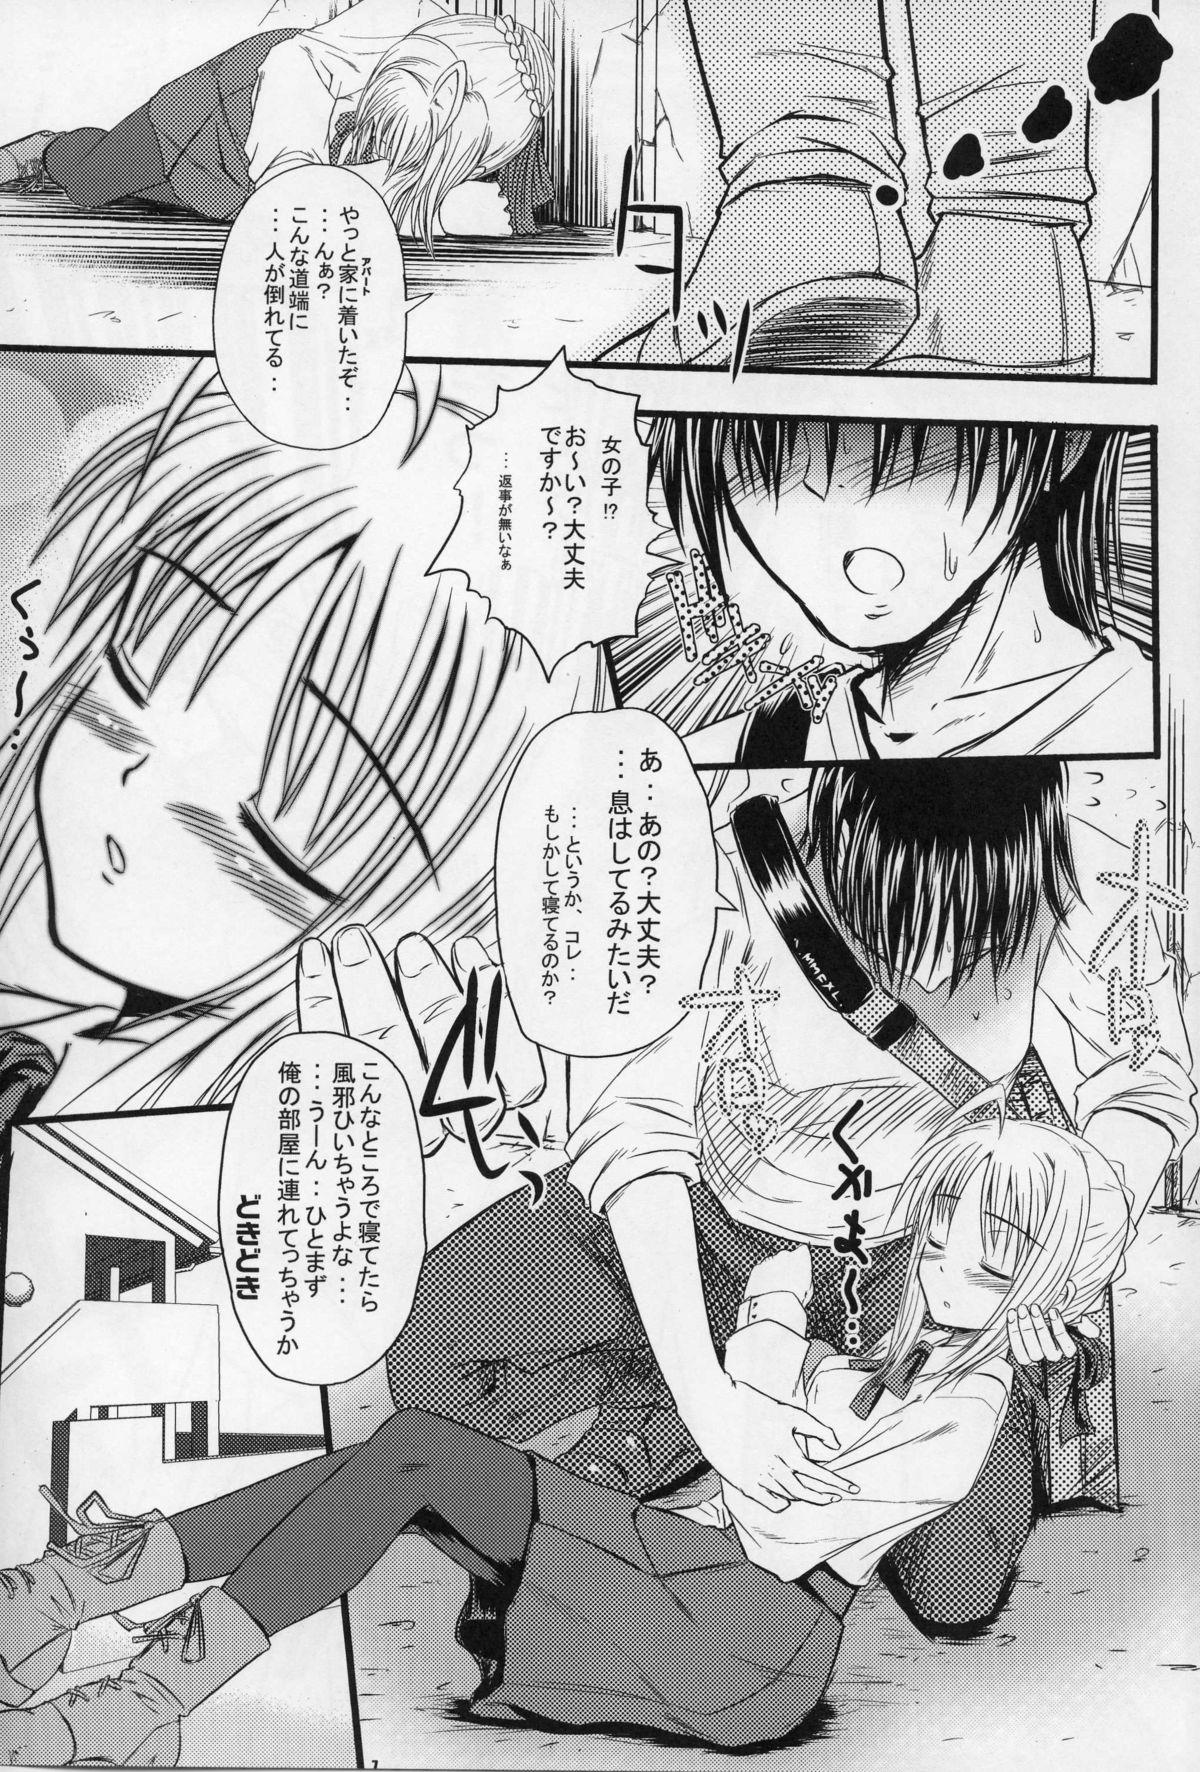 Cocks Saber of Stripes. - Fate stay night Hottie - Page 4